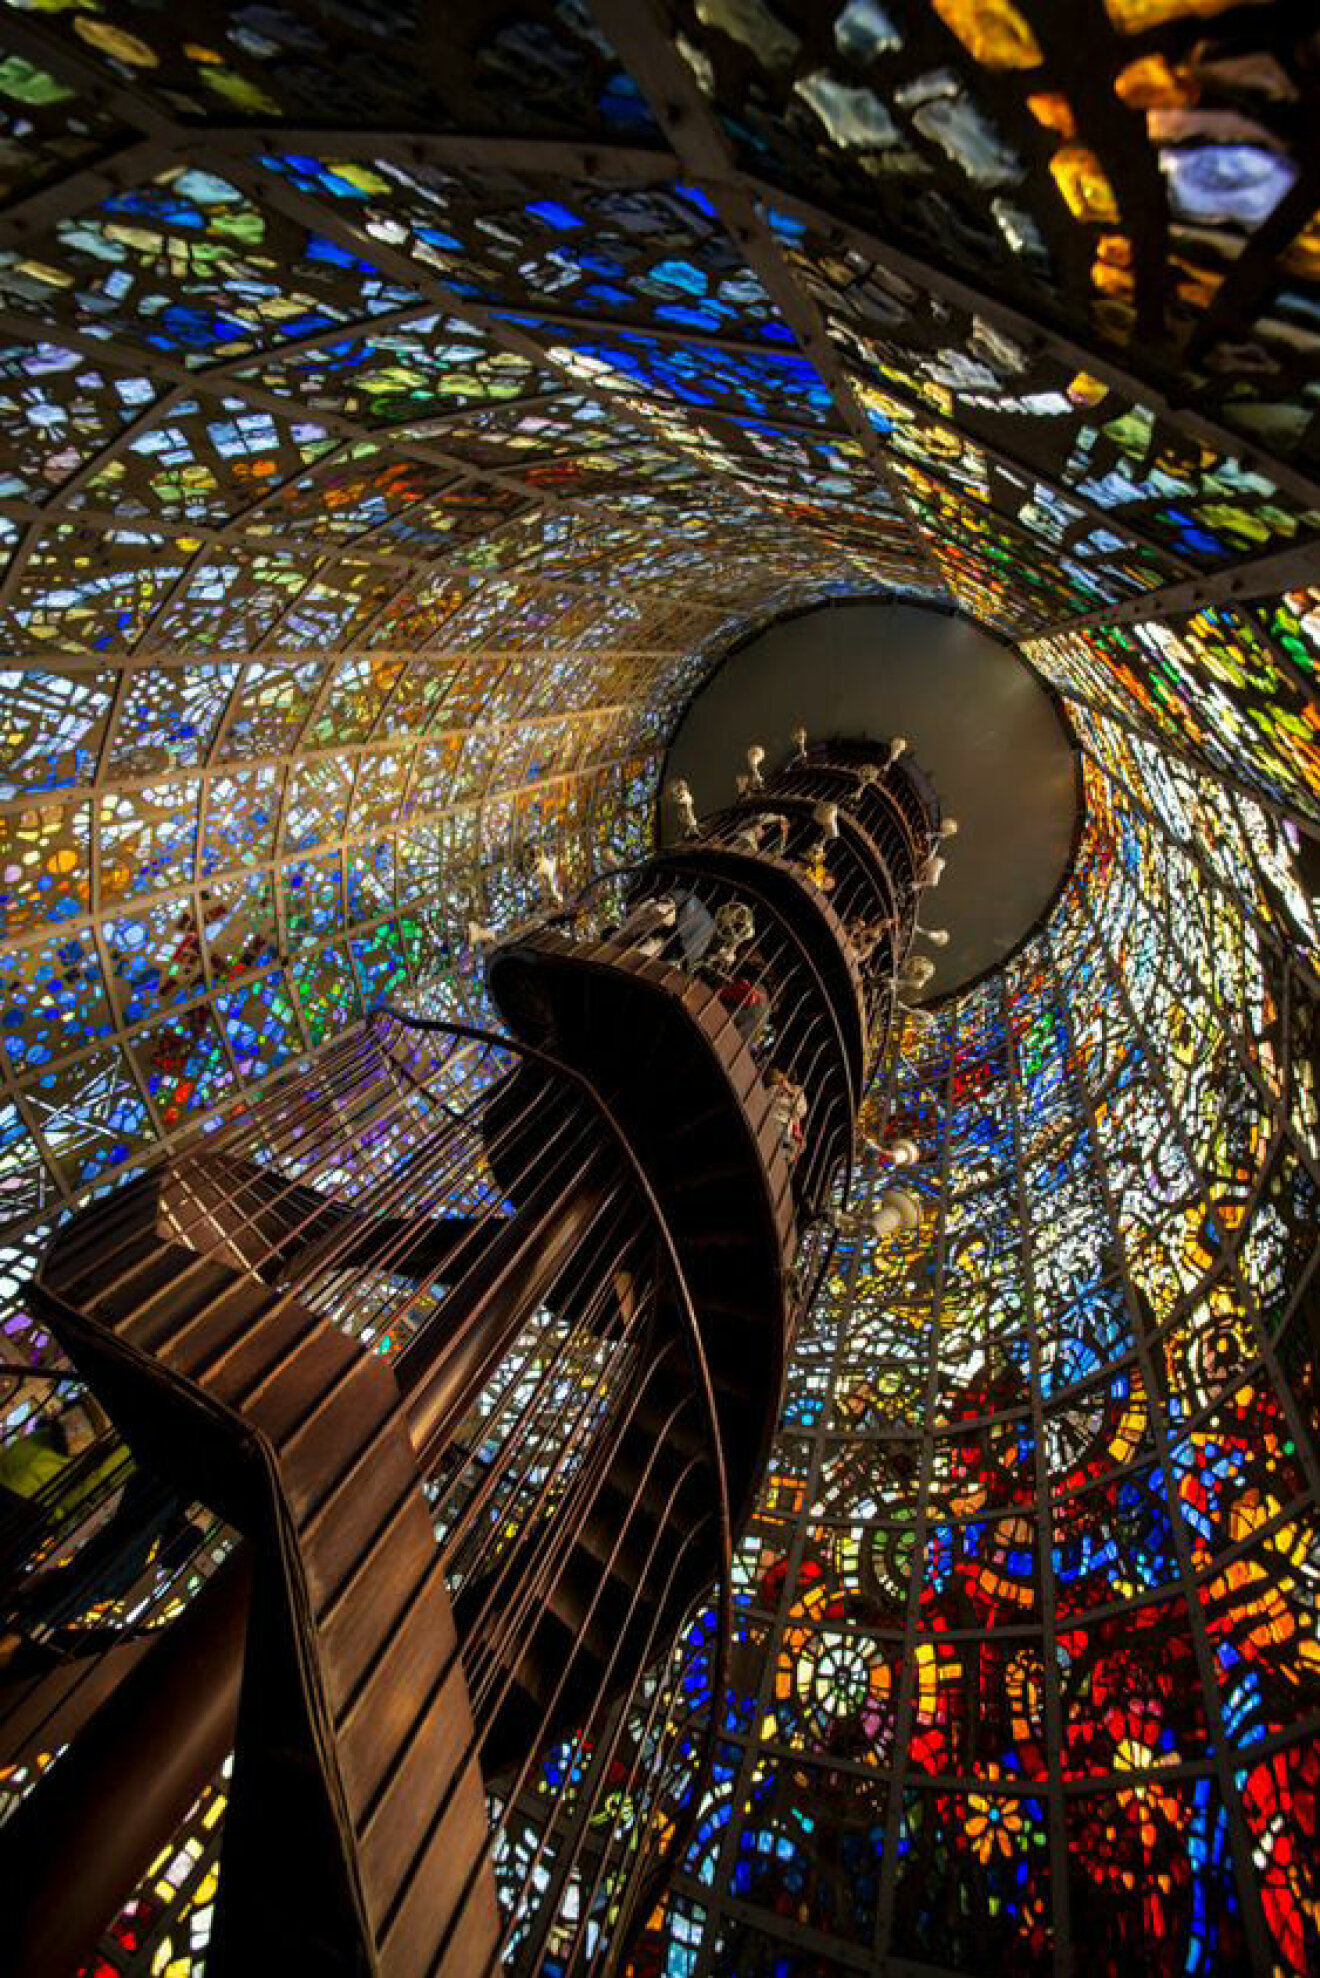 02. stained-glass-staircase-hakone-outdoor-museum-japan